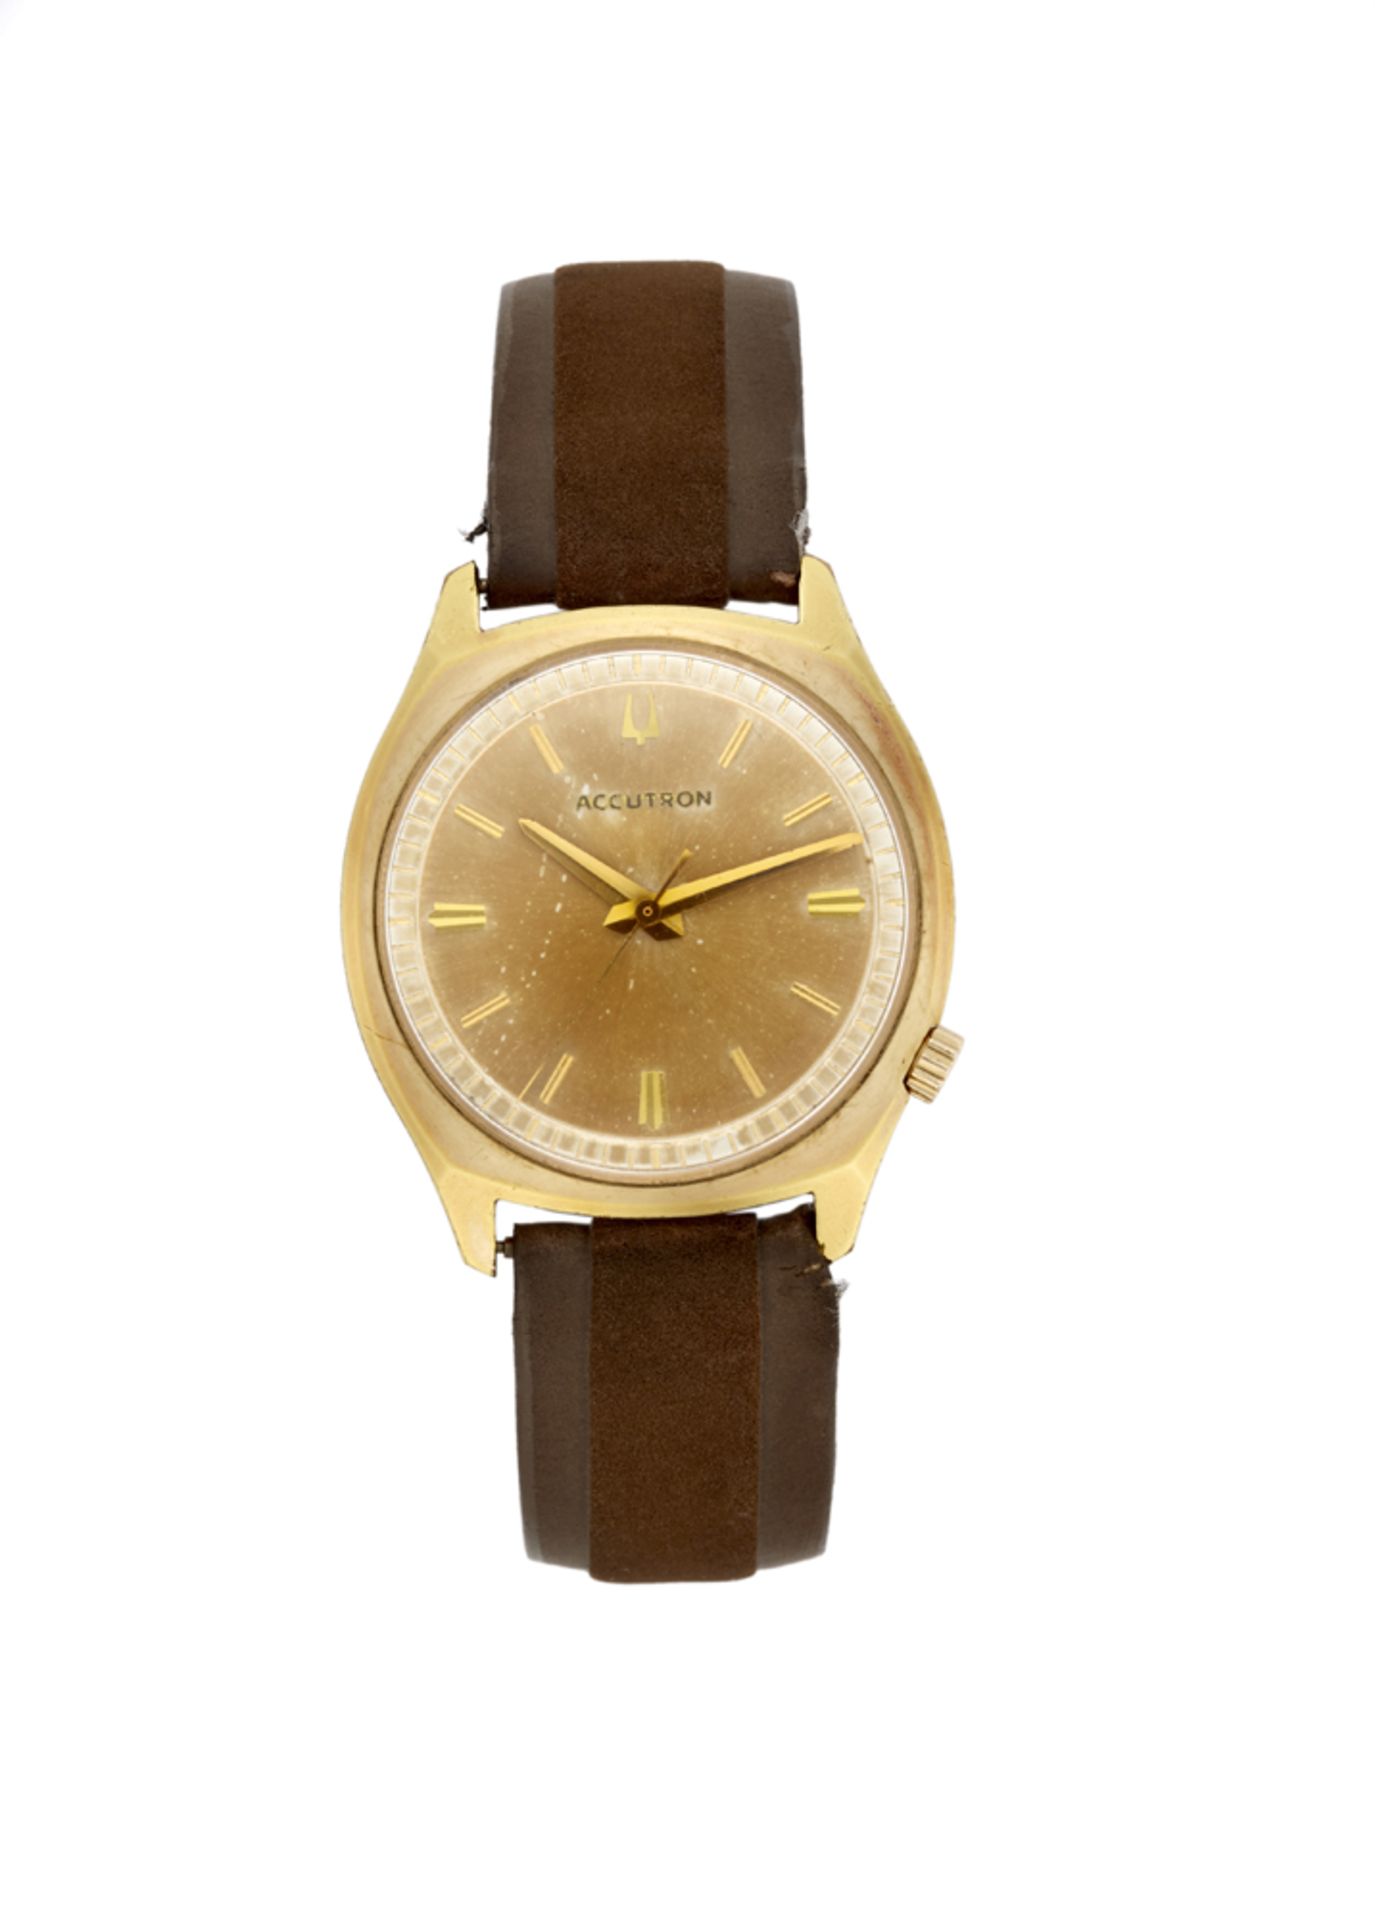 BULOVA ACCUTRON<br>Gent's Steel and metal plated-gold wristwatch<br>1970s<br>Dial, movement and case